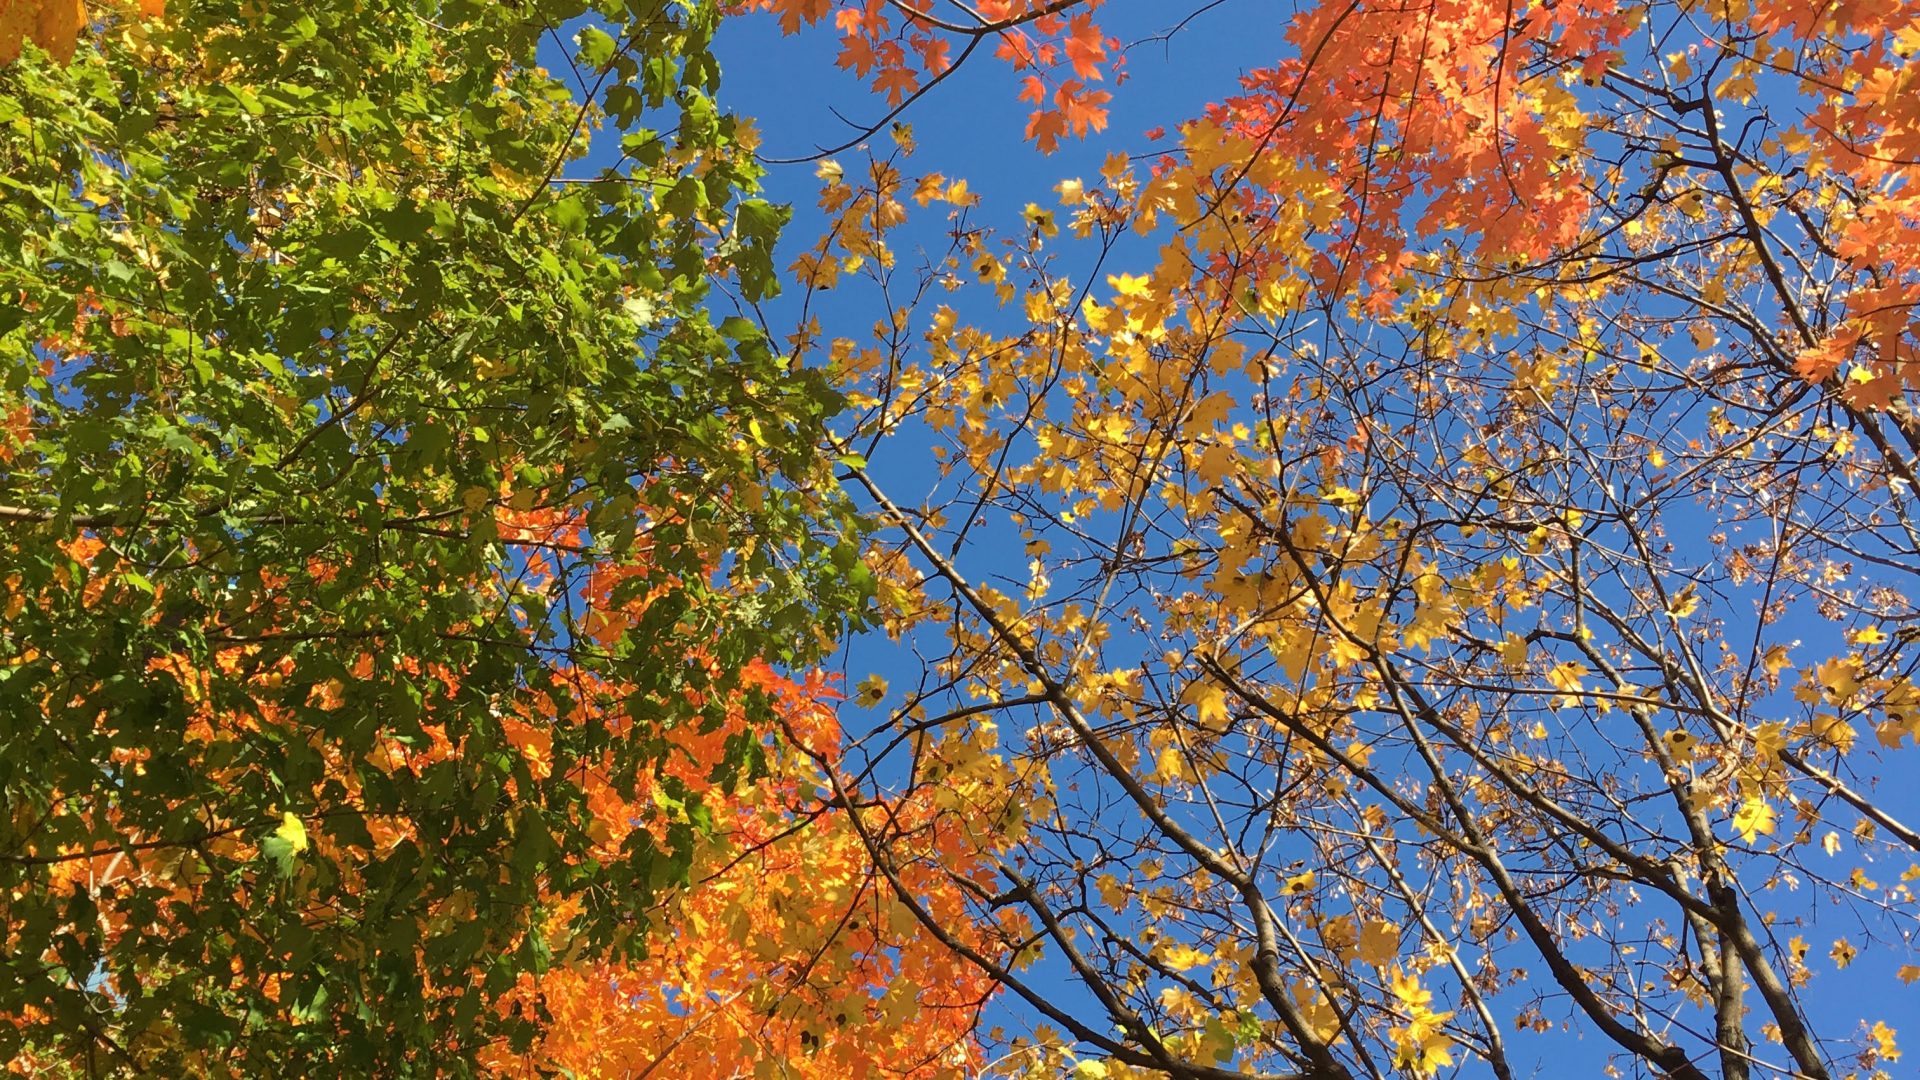 The sky interrupted by multicoloured fall leaves.